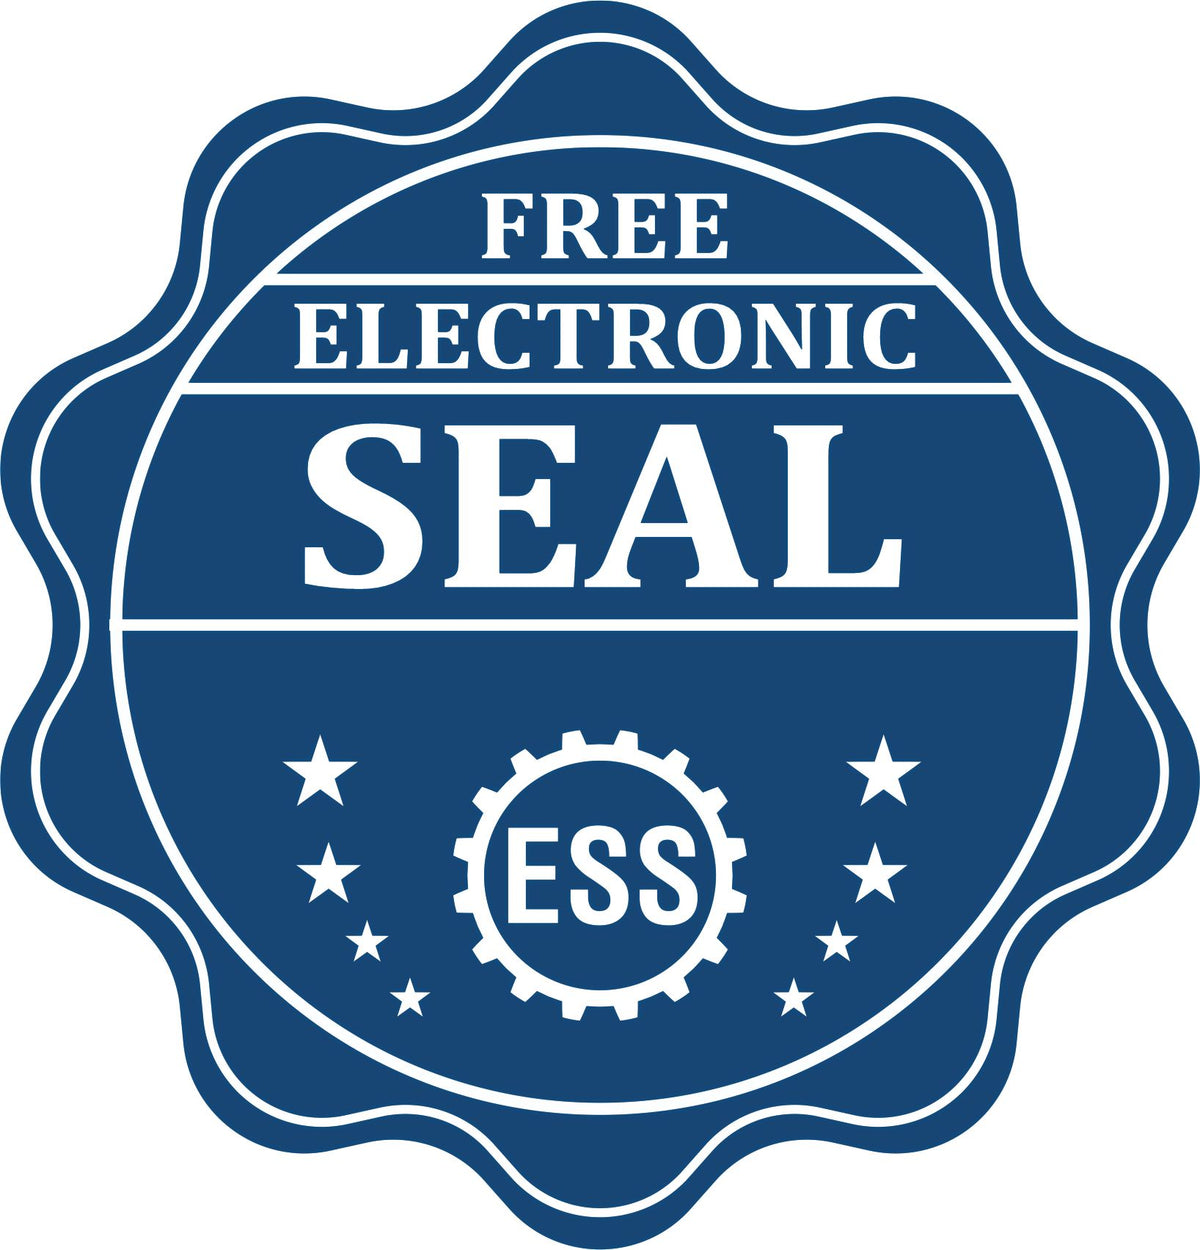 A badge showing a free electronic seal for the Soft Oklahoma Professional Engineer Seal with stars and the ESS gear on the emblem.